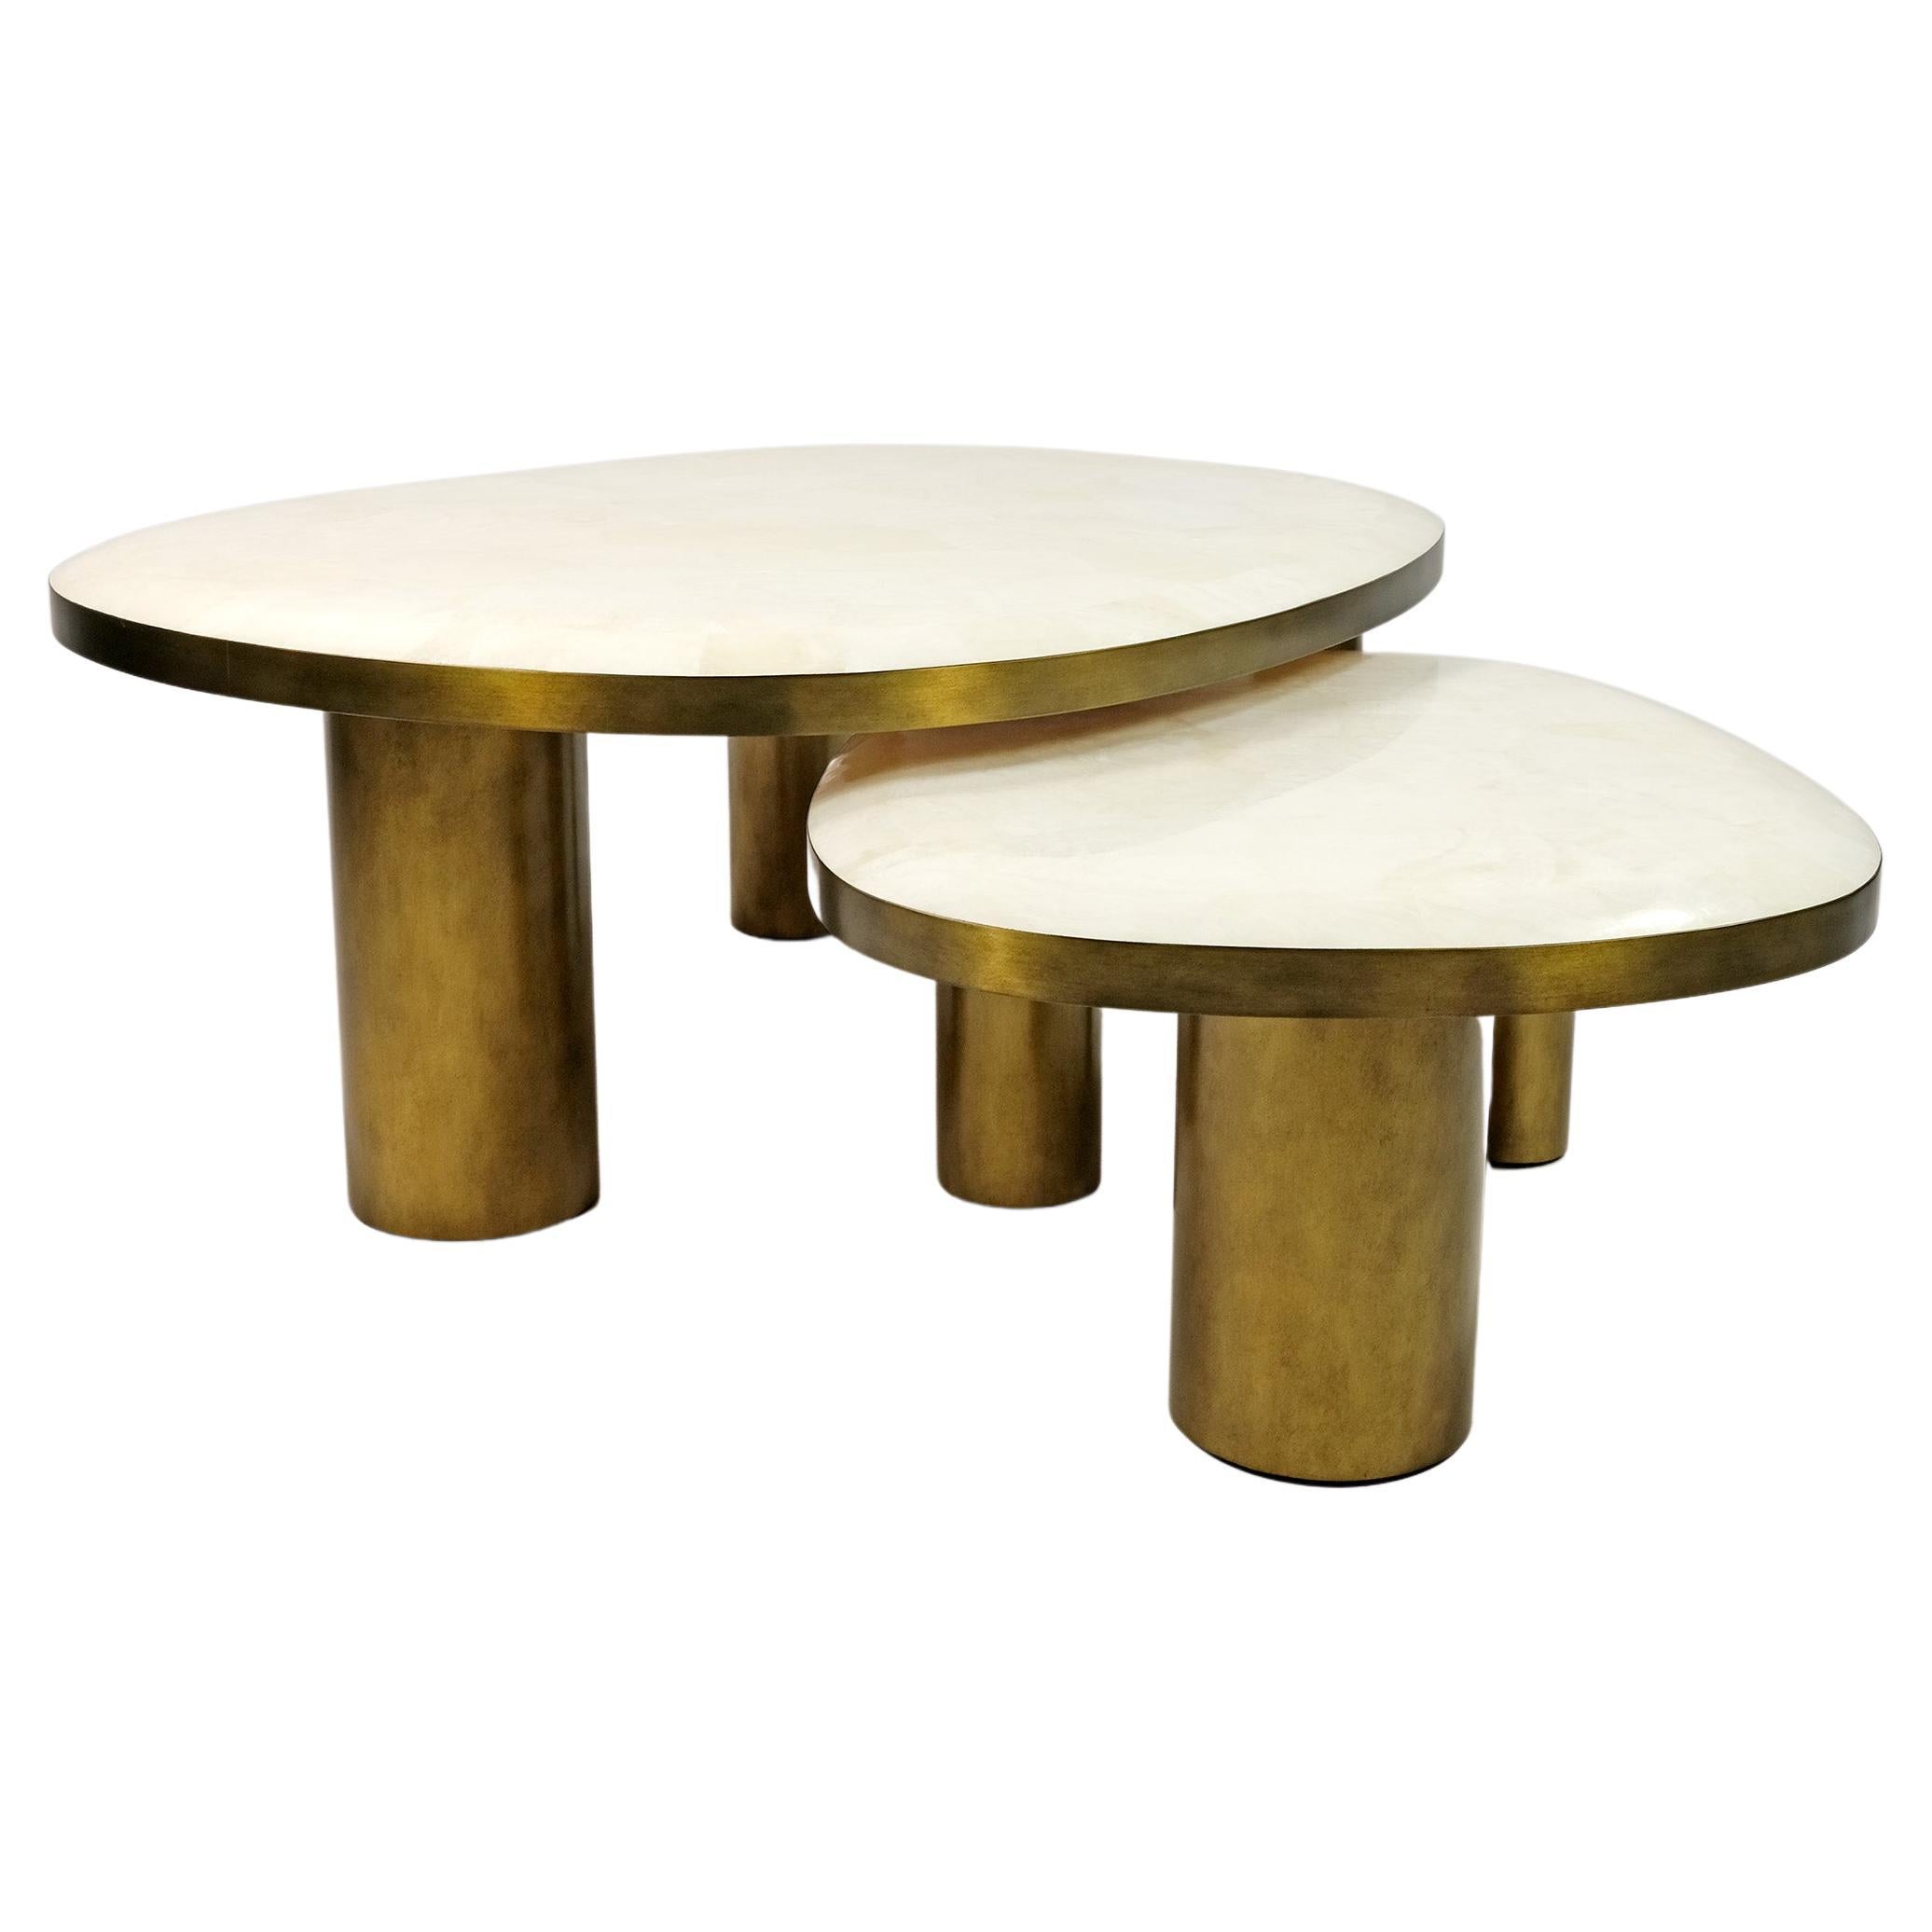 Set of 2 Organic Coffee Tables in Rock Crystal and Brass by Ginger Brown